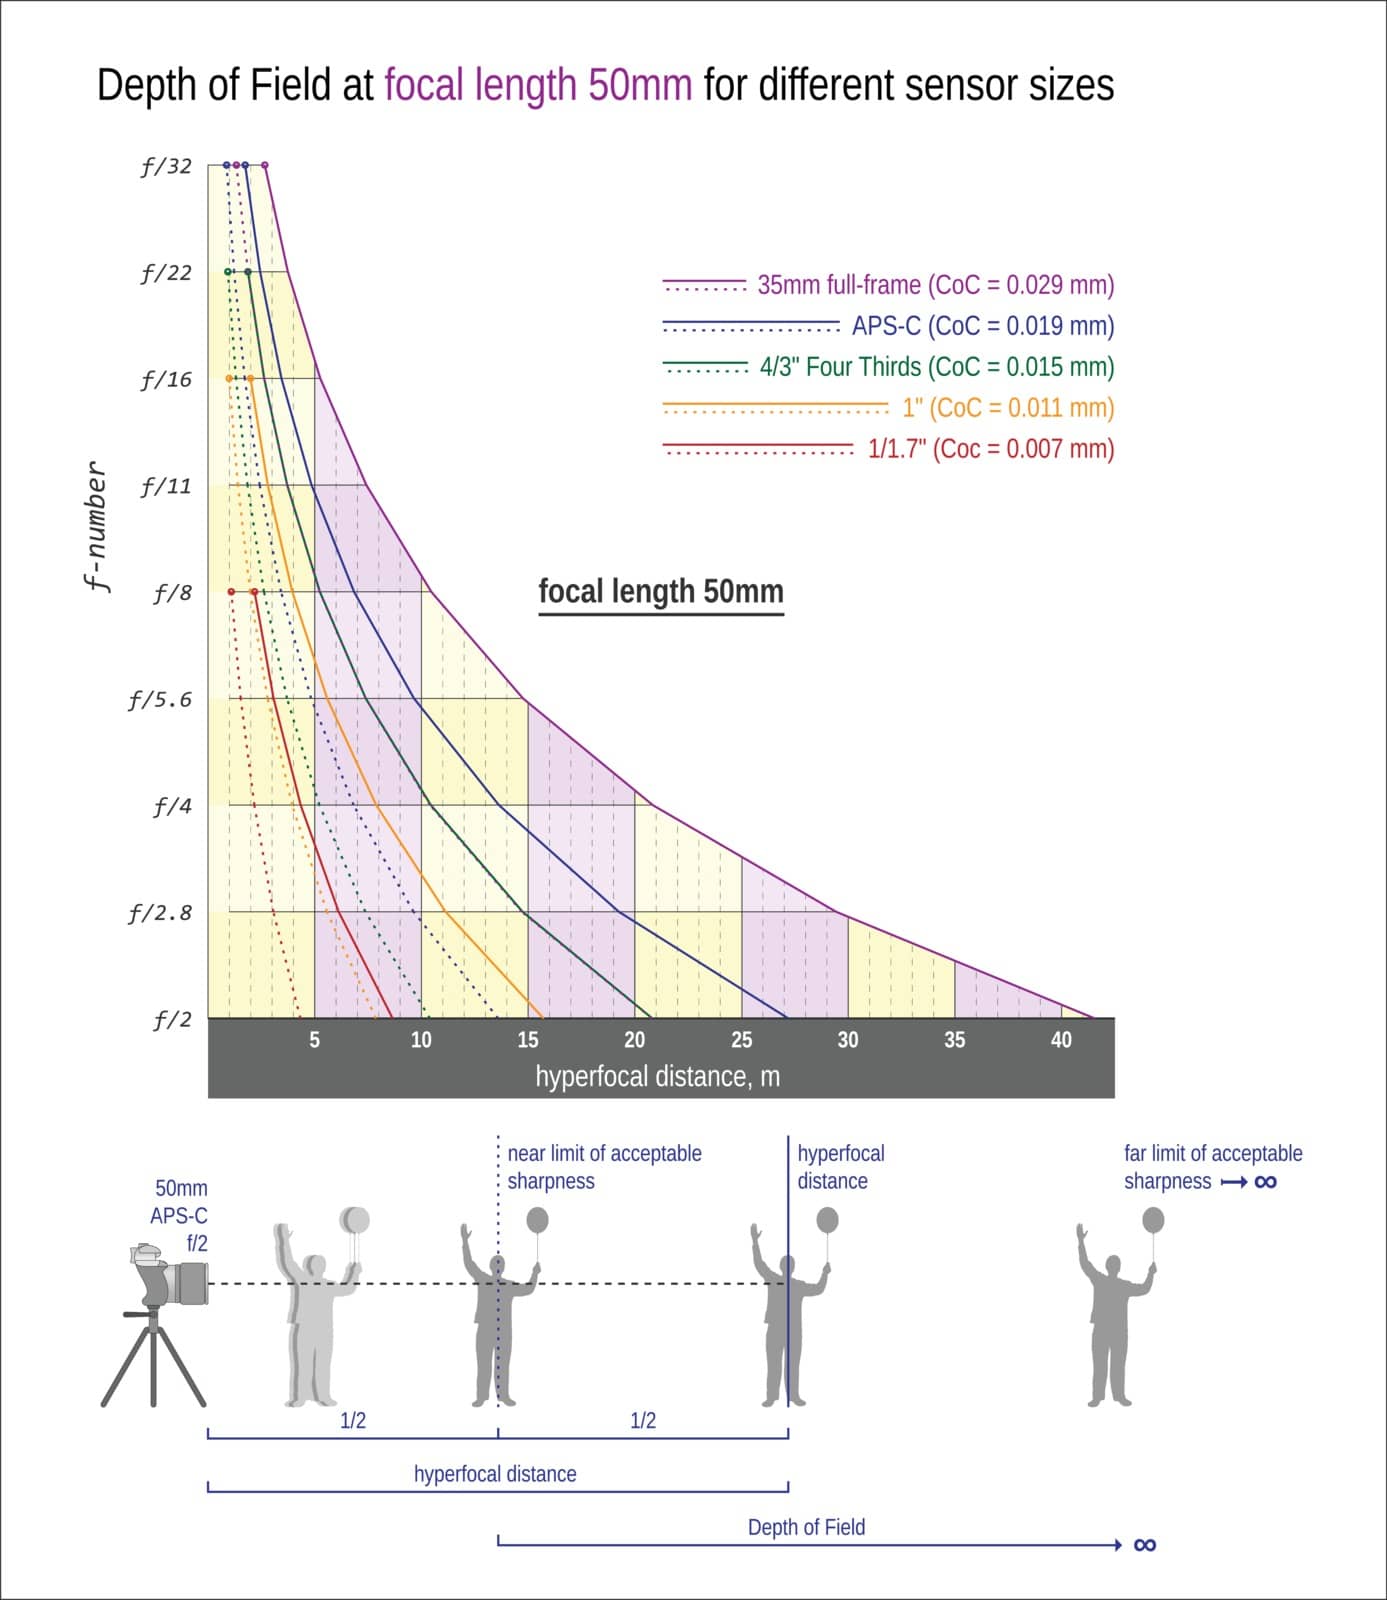 Useful graph for sharper images. 35mm equivalent of focal length is 50mm.